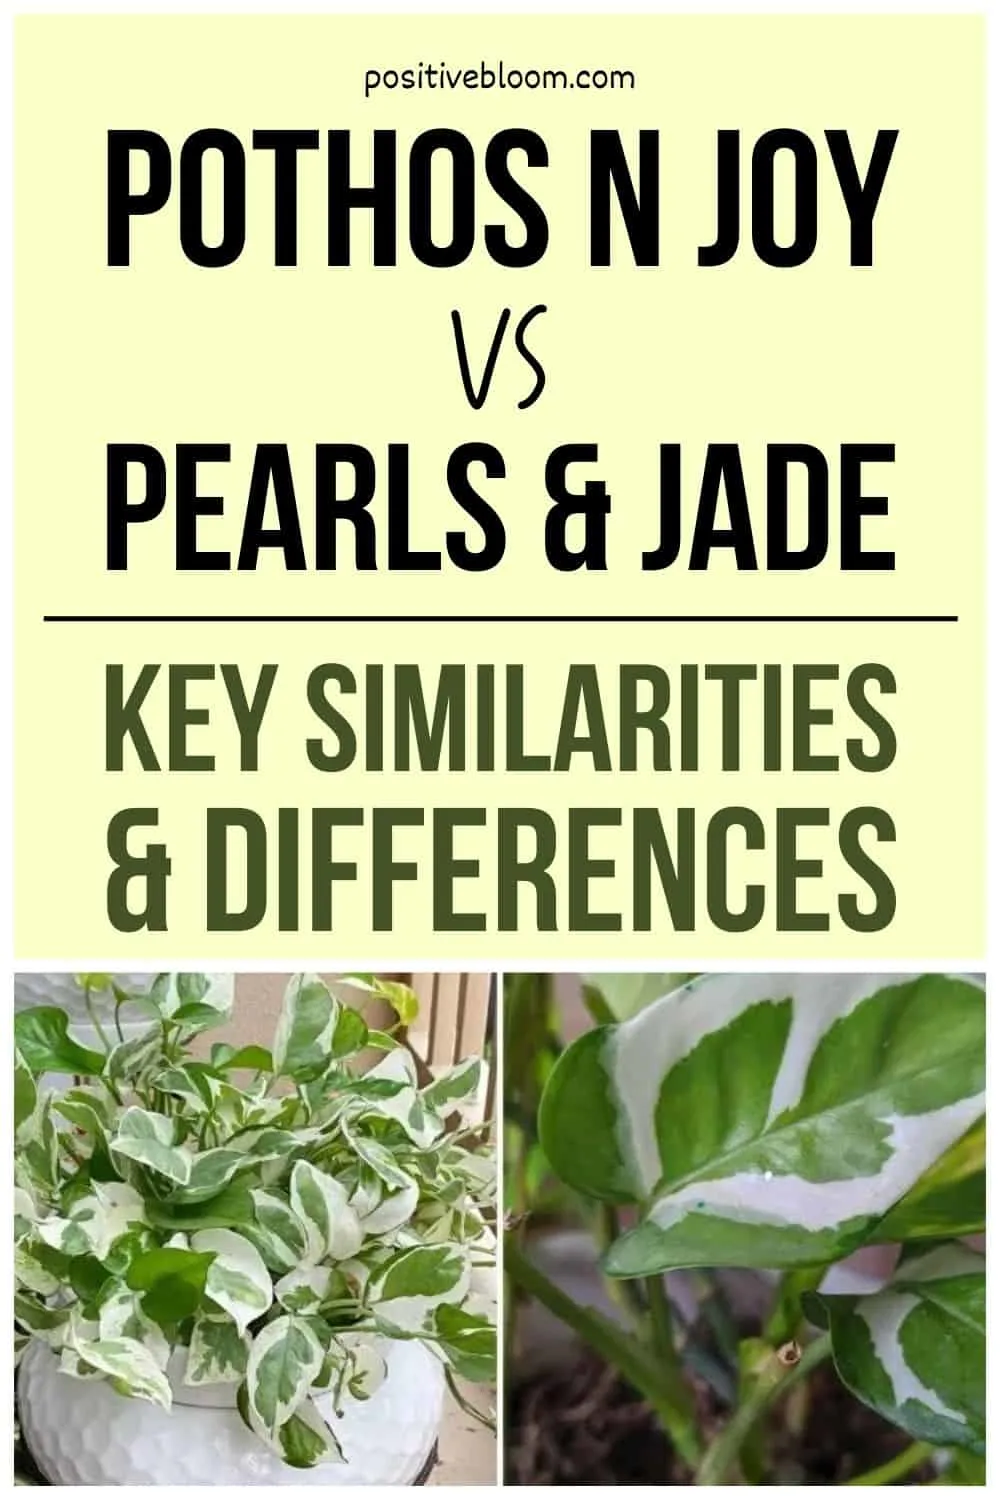 Pothos N Joy vs Pearls And Jade Key Similarities And Differences Pinterest